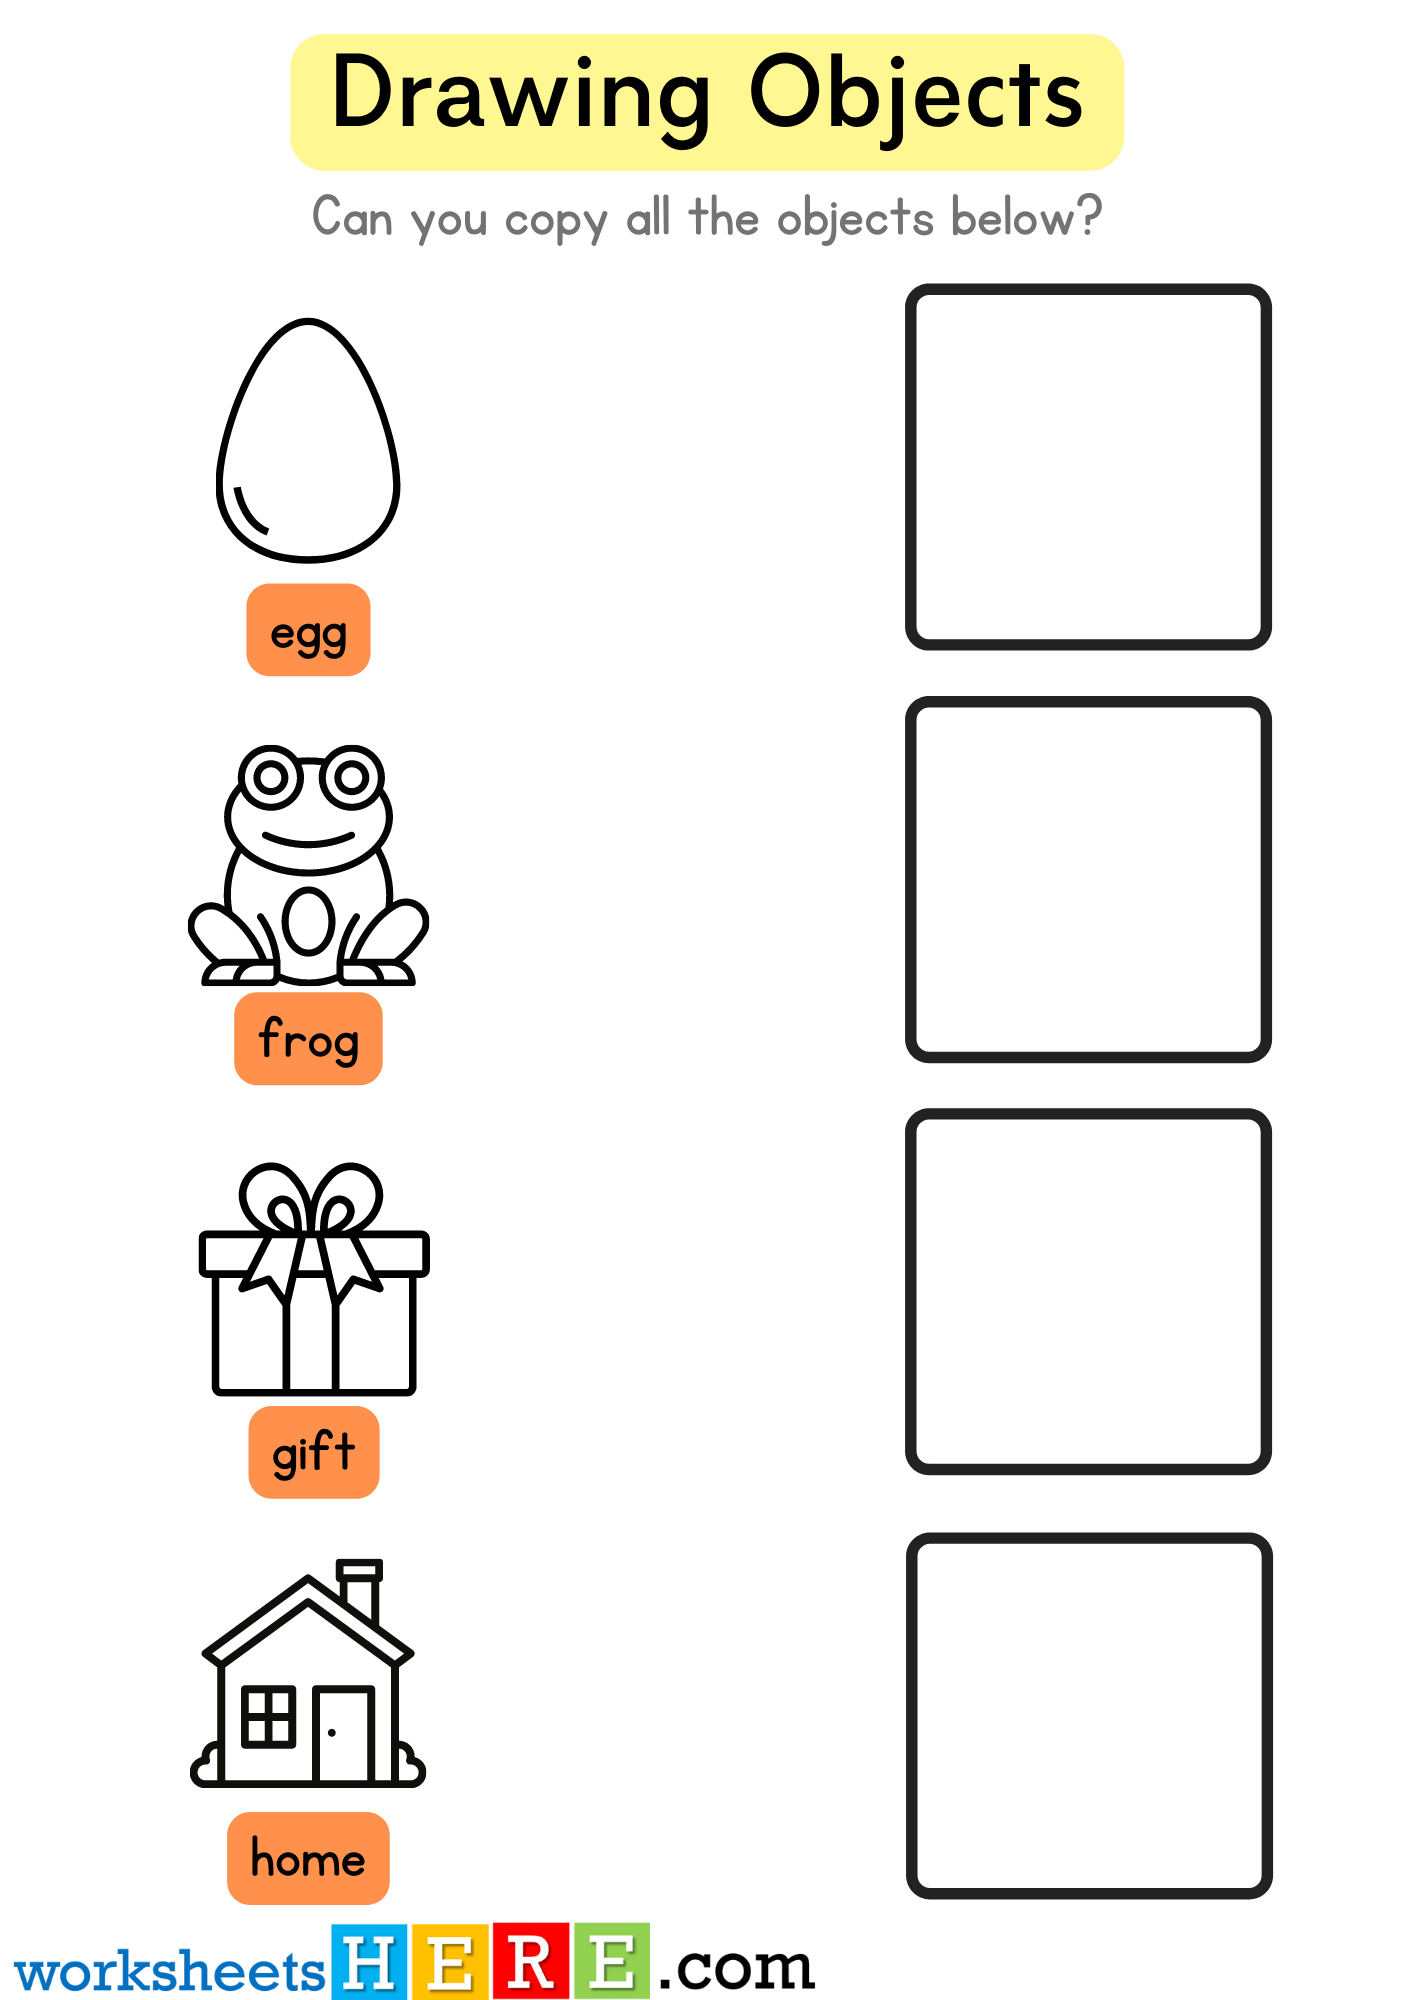 Copy All the Objects Below, Drawing Egg Frog Gift Home Examples Worksheet For Kids